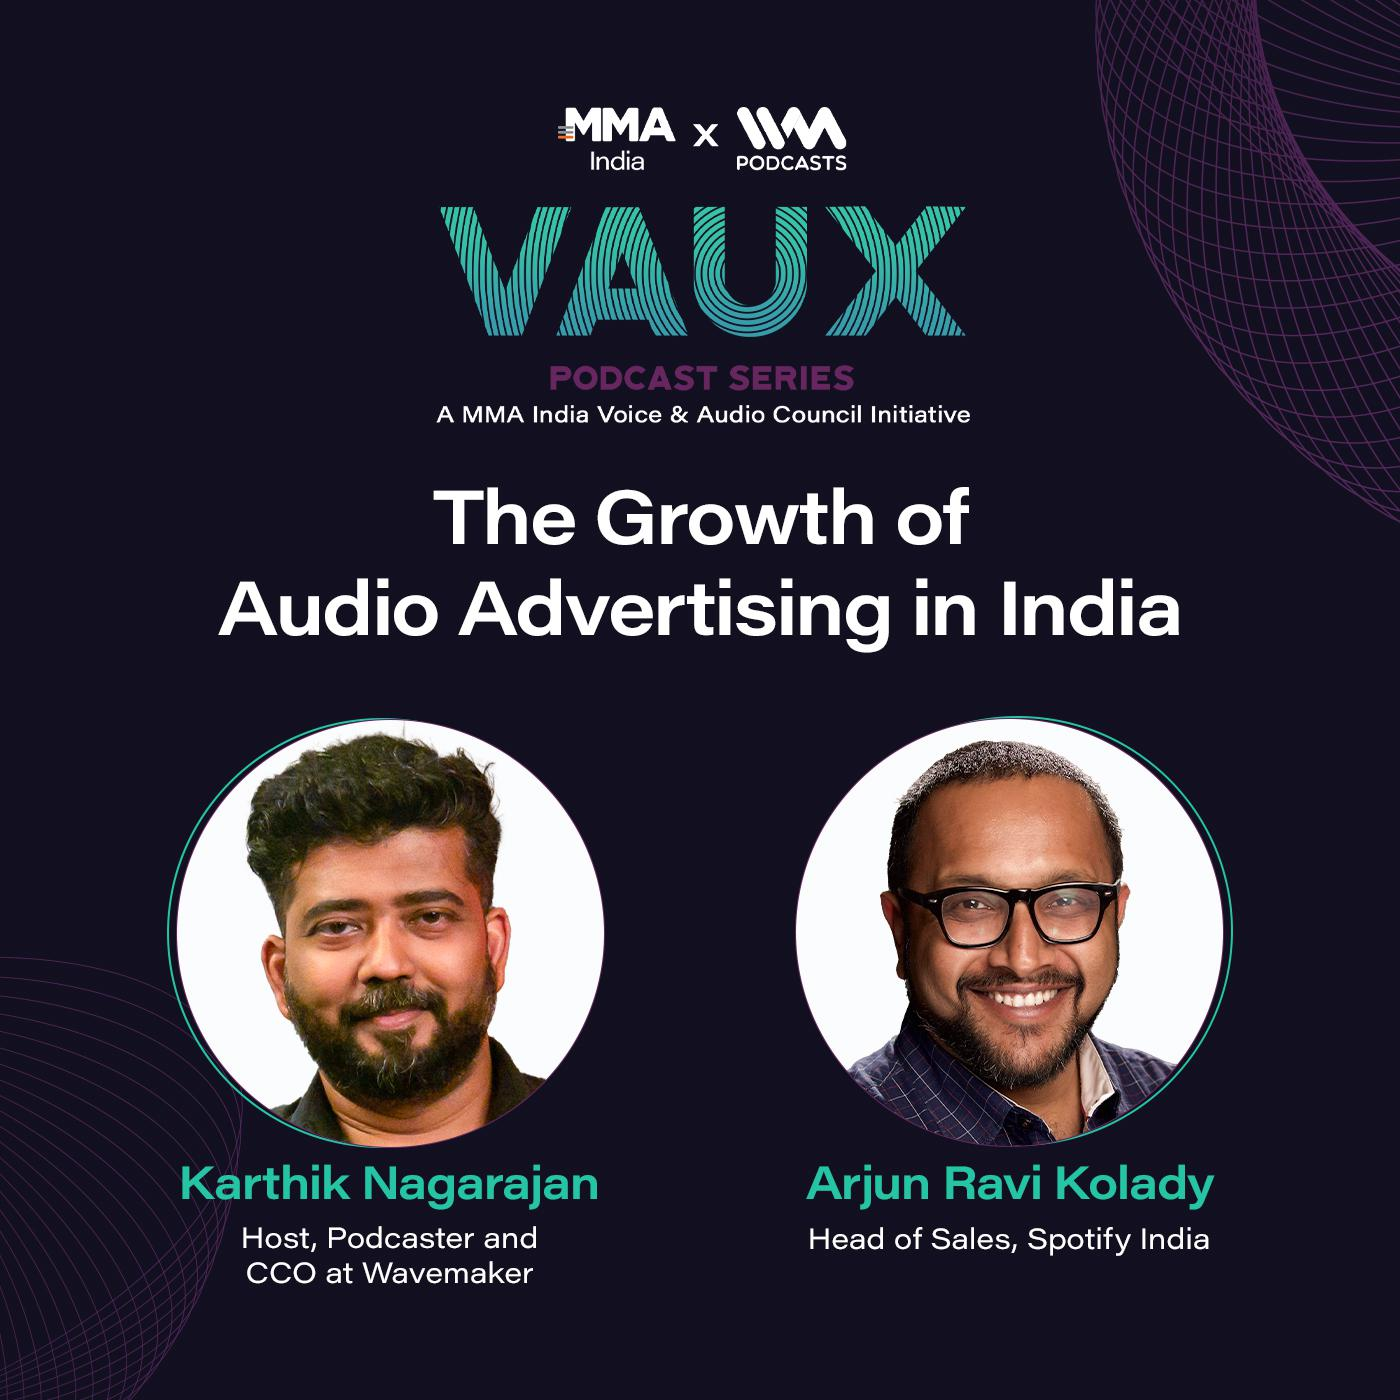 The Growth of Audio Advertising in India